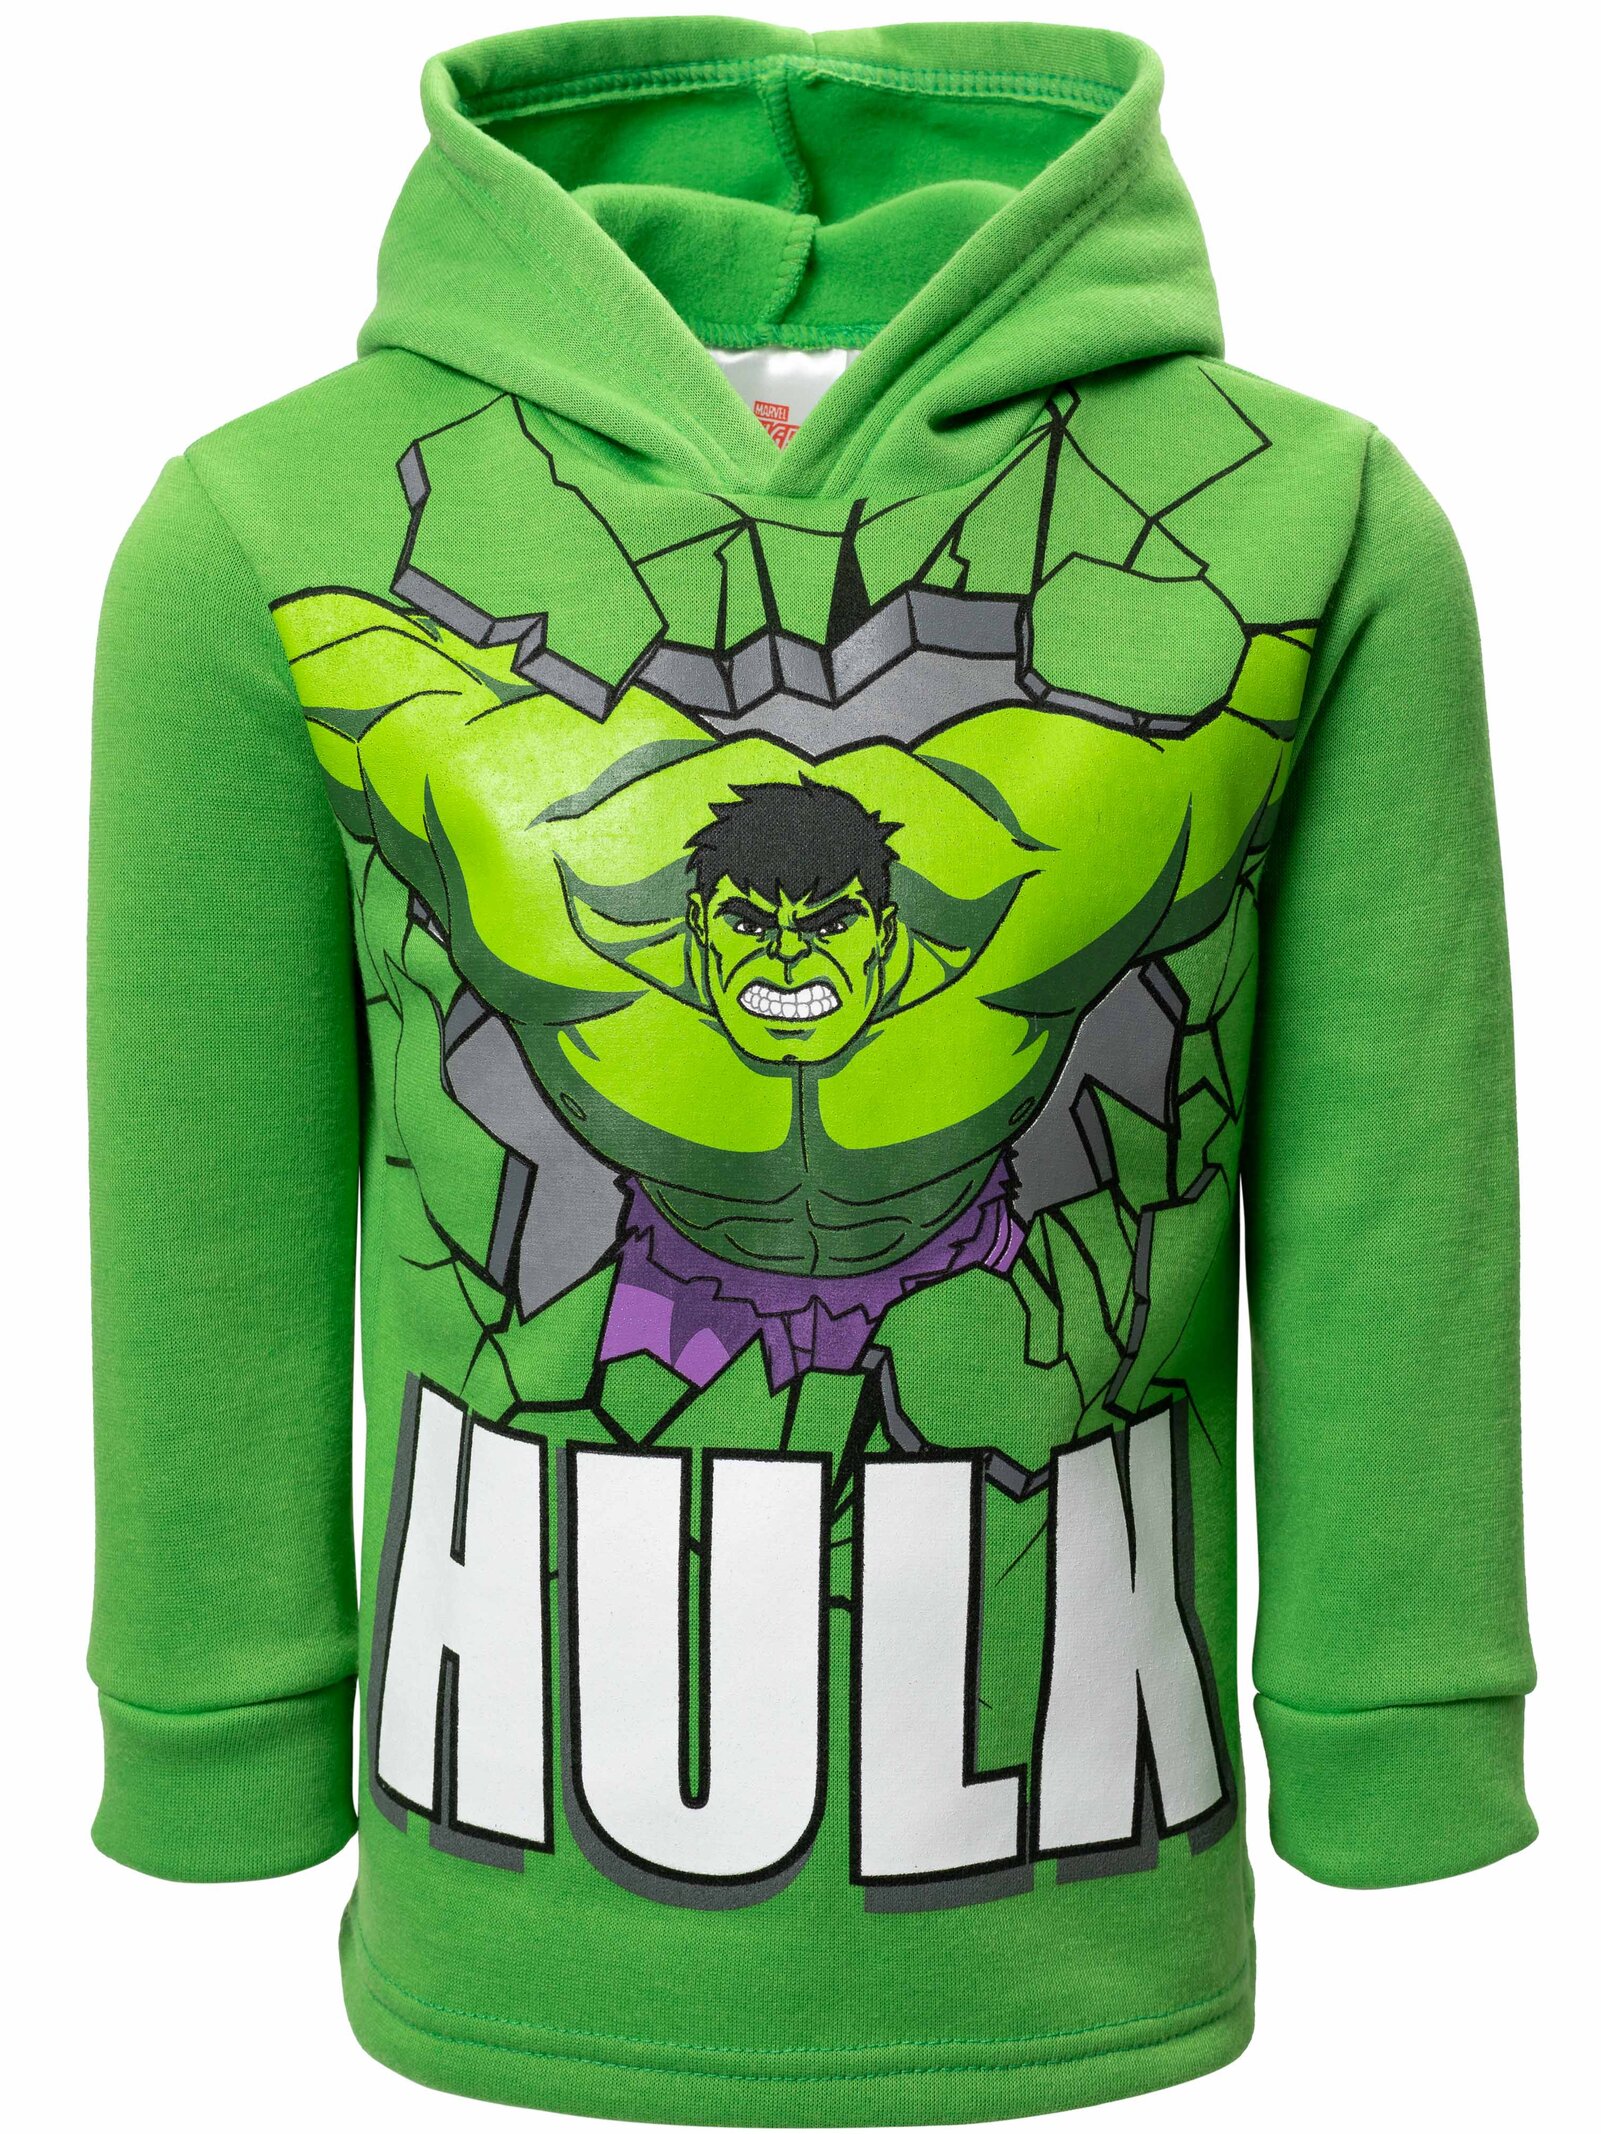 Marvel Avengers Hulk Big Boys Fleece Pullover Hoodie and Pants Outfit ...